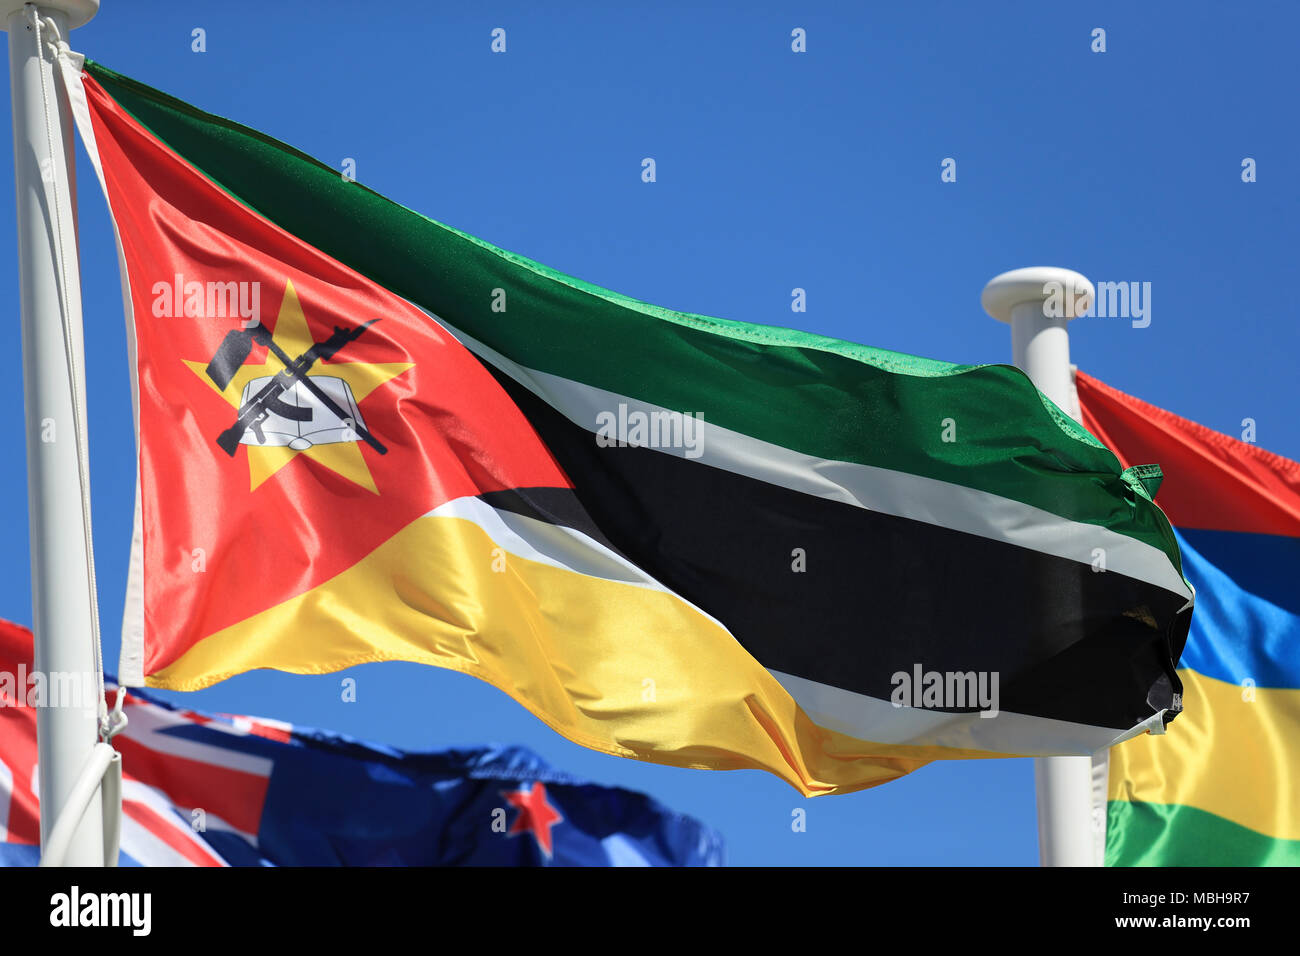 The flag of Mozambique on a pole at the Commonwealth Games Stock Photo